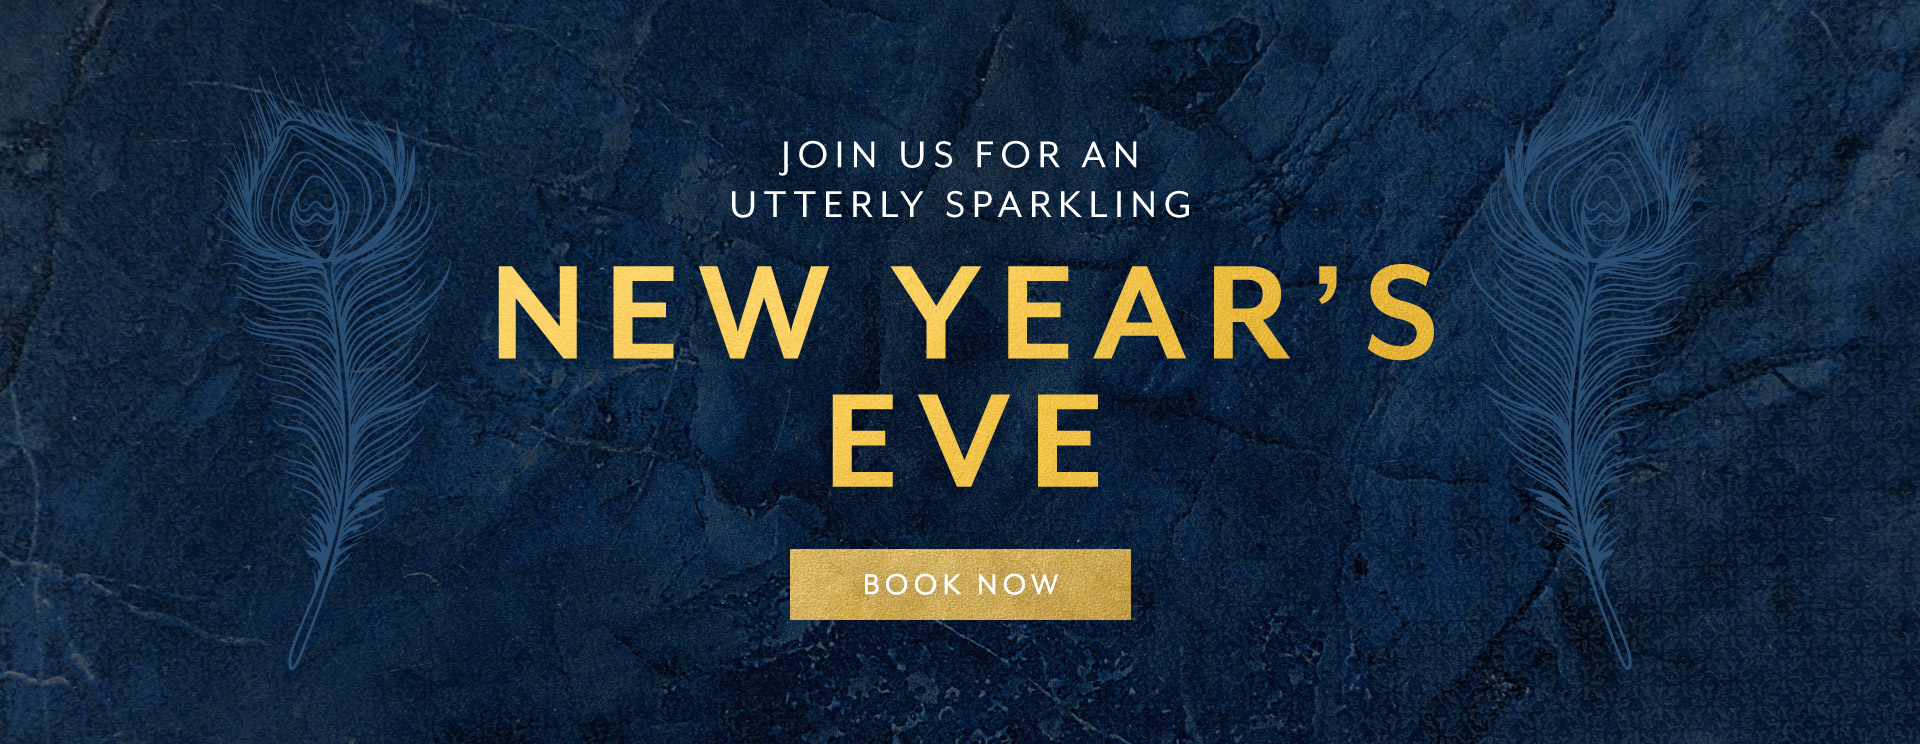 New Year's Eve at The Fox & Hounds